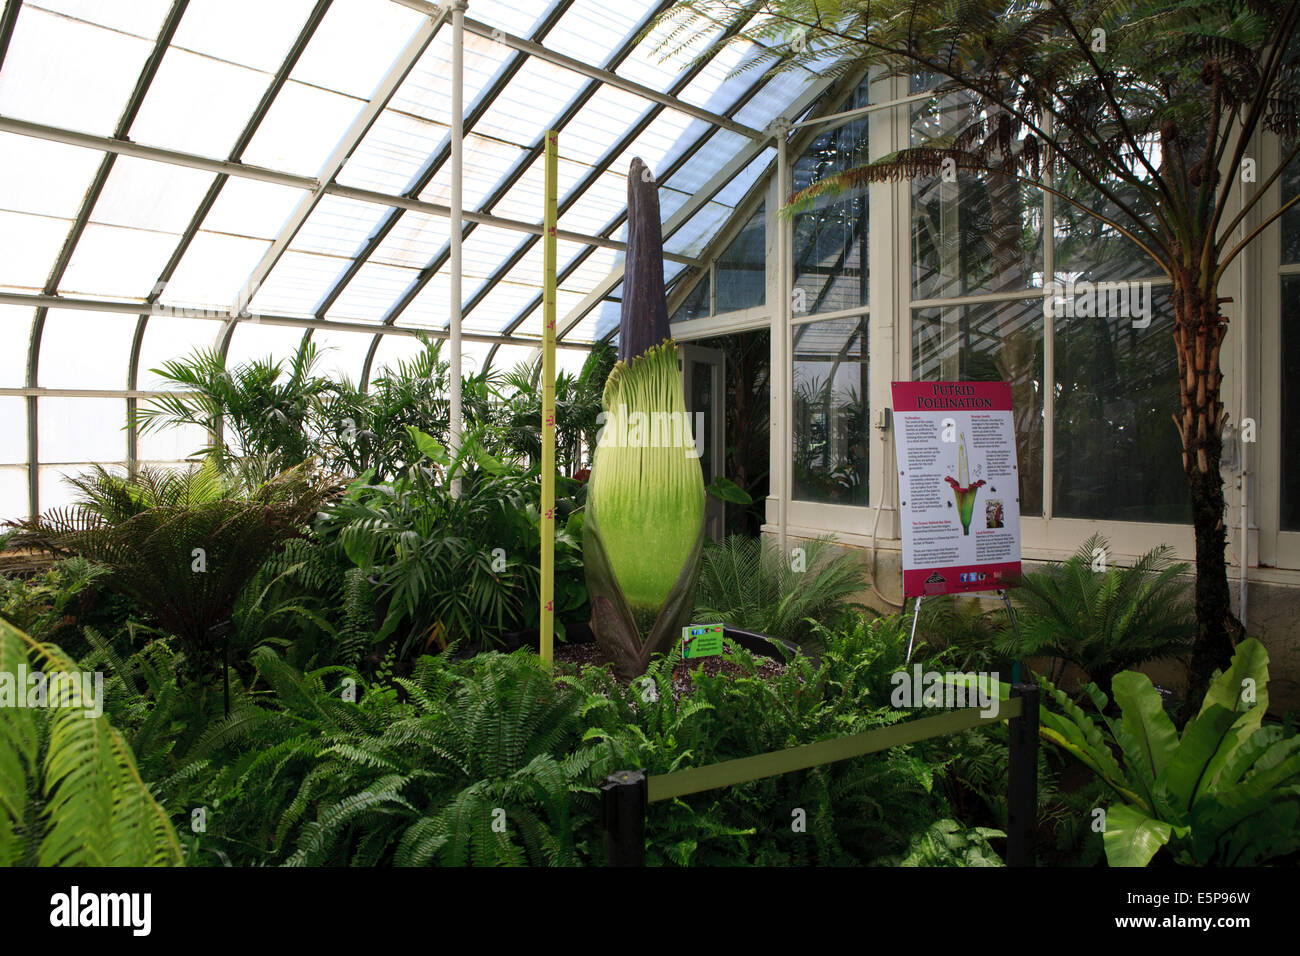 Unopened bud of the corpse flower or titan arum (Amorphophallus titanum), at the Buffalo Botanical Gardens, prior to blooming. Stock Photo